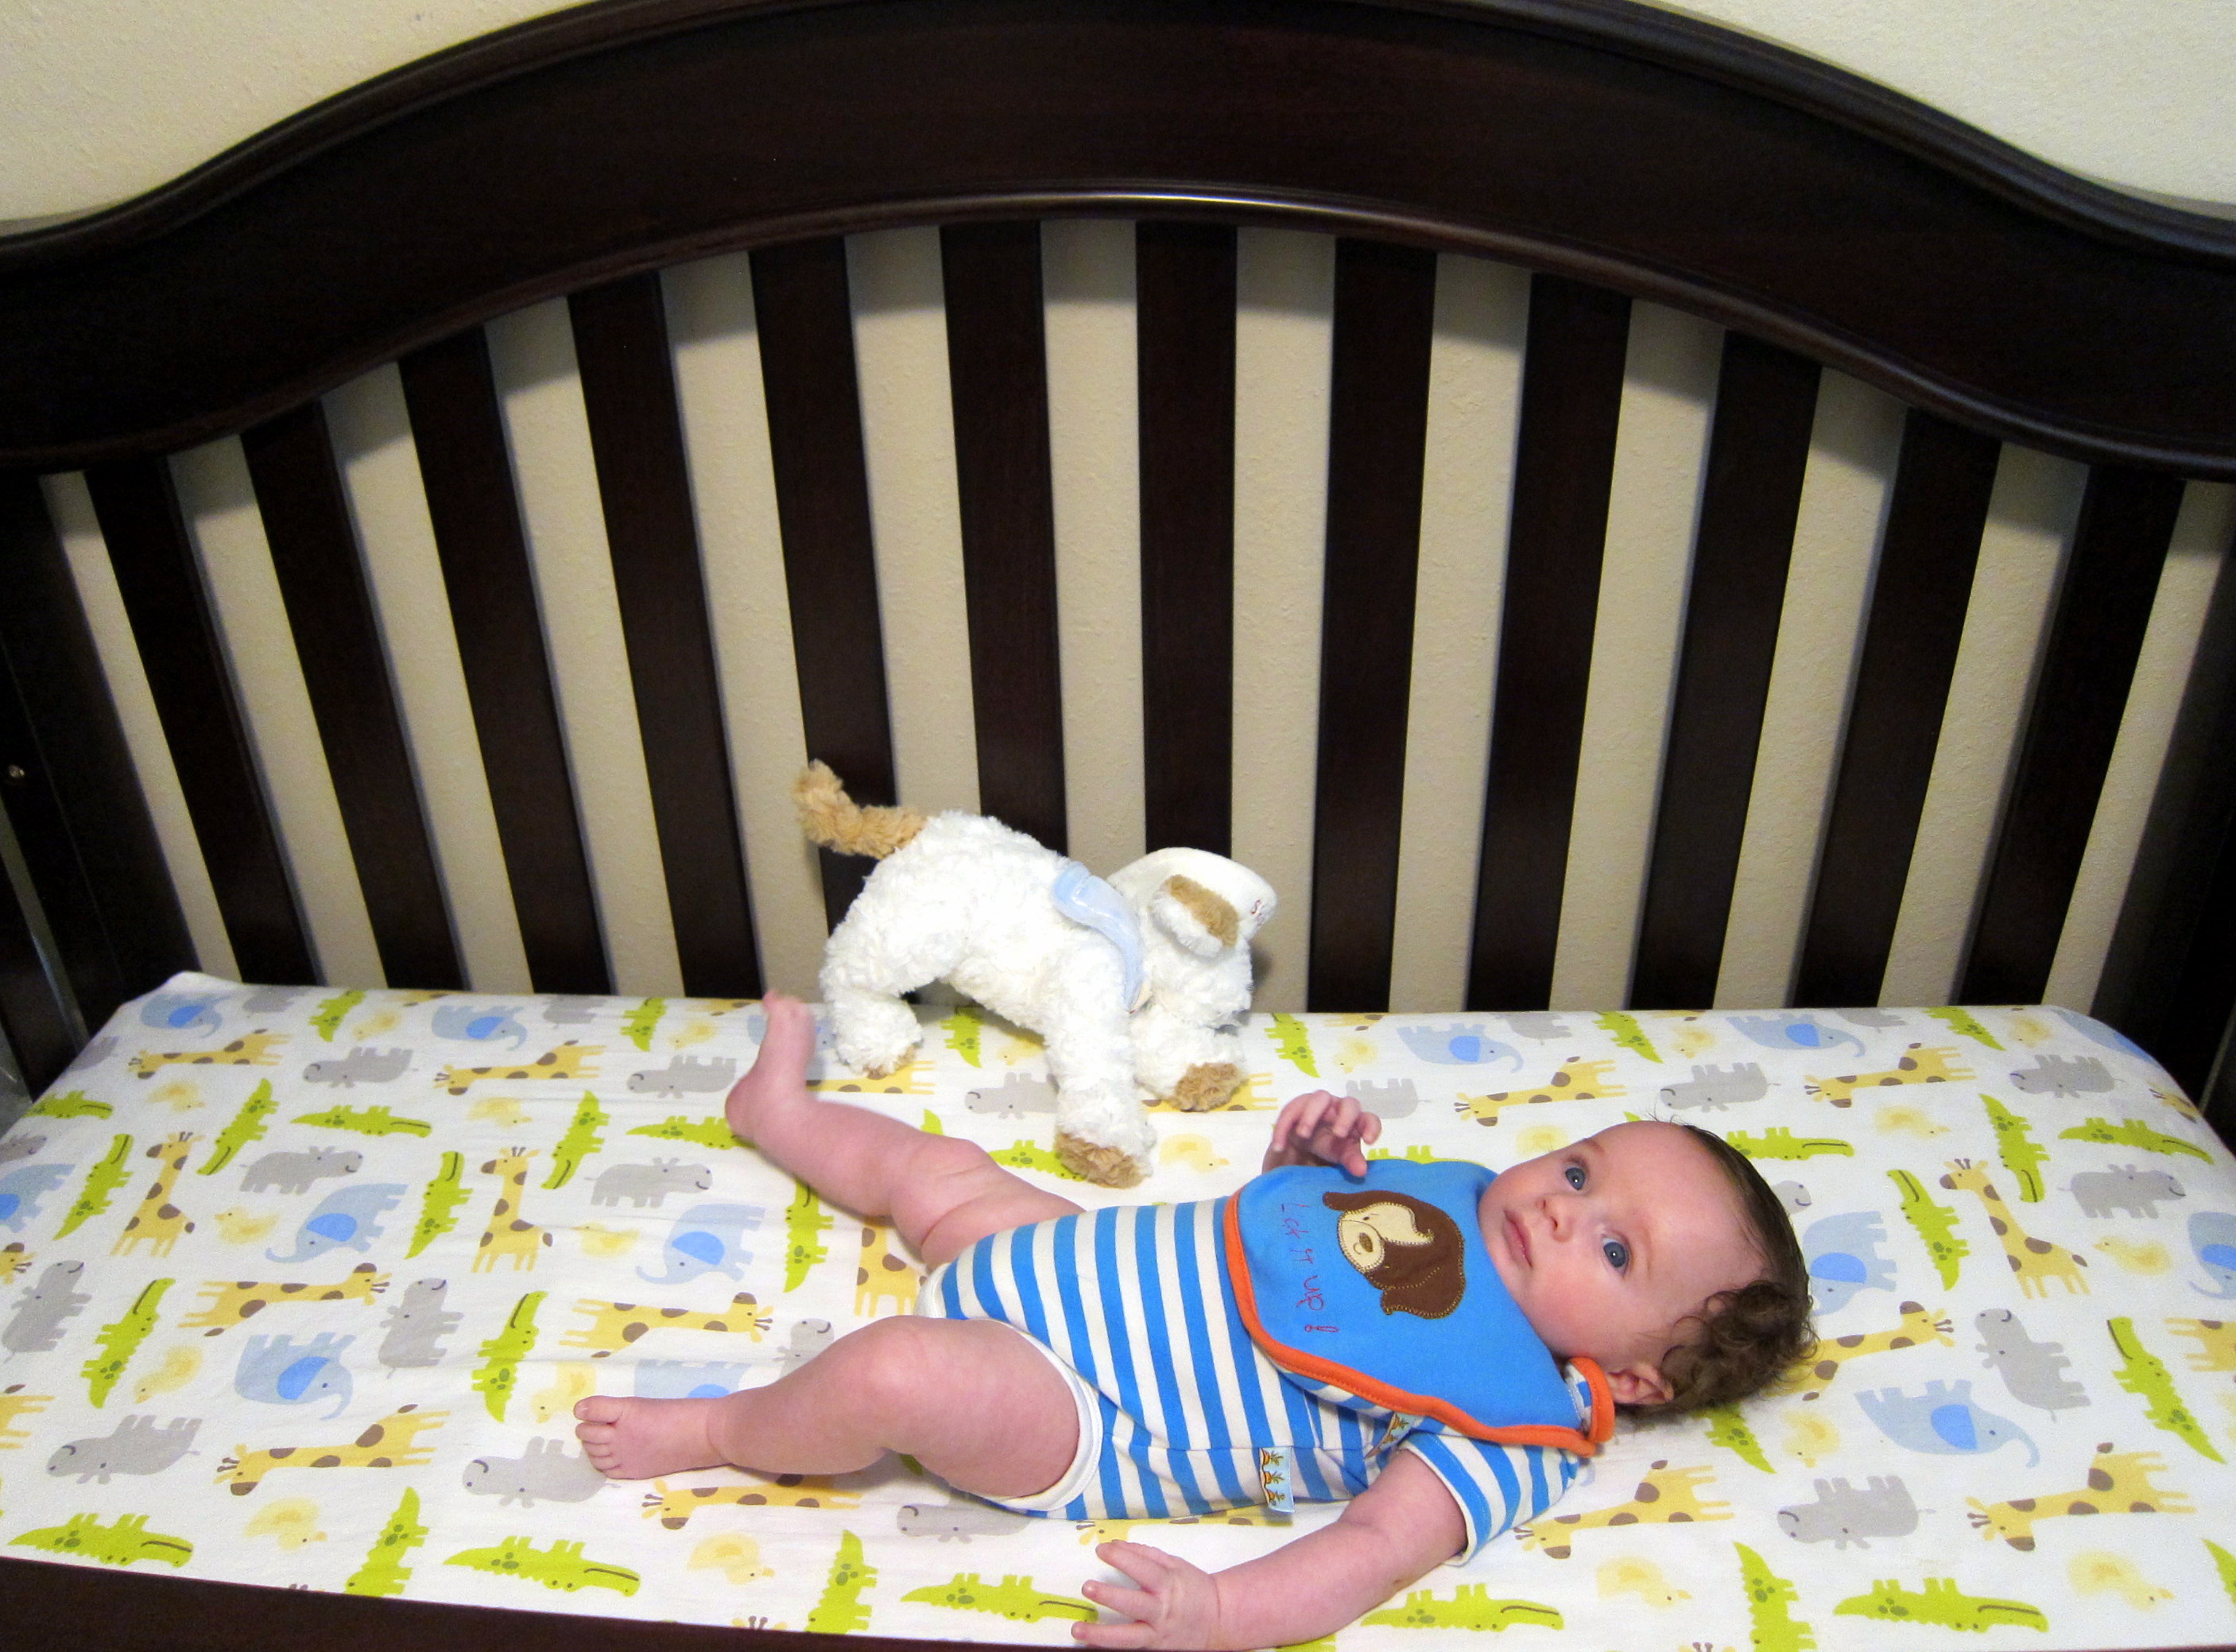 Charlie in his 4 in one crib, which has a higher setting for infants, lower setting for standers, and can be used as a toddler and big kid bed.